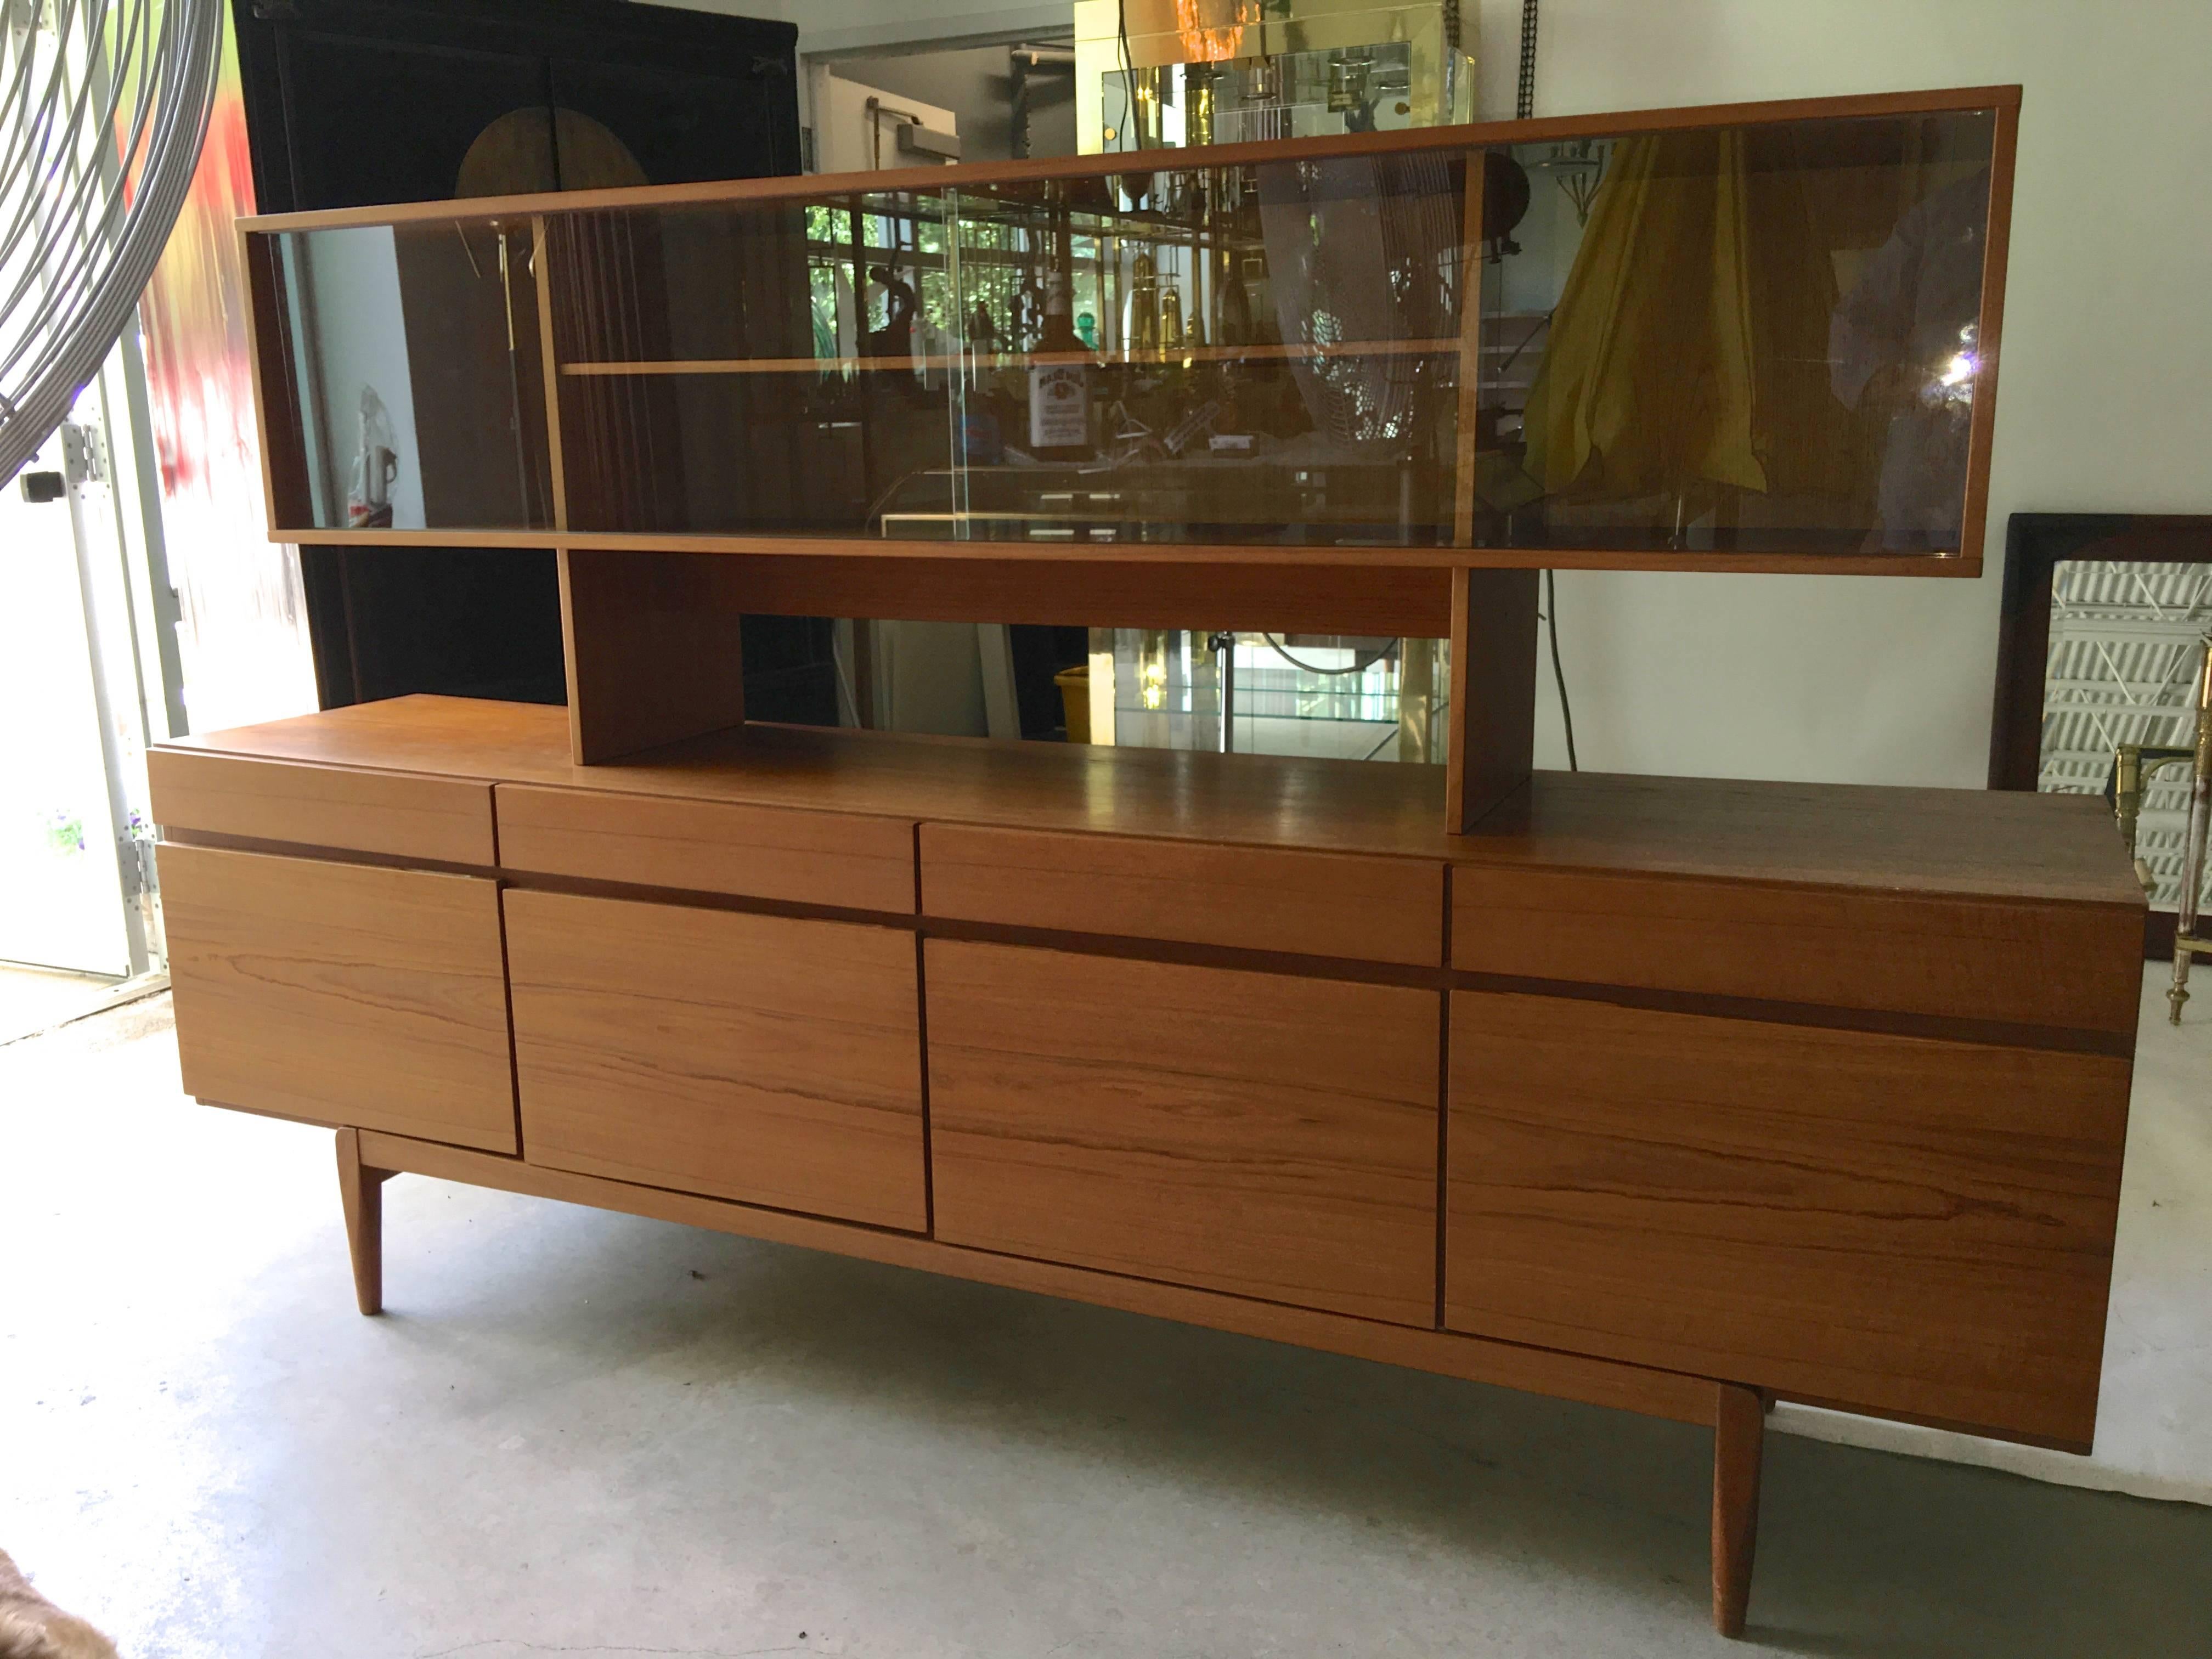 Danish long teak FA-66 credenza sideboard buffet by Ib Kofod-Larsen for Faarup Møbelfabrik, Denmark together with a glass fronted hutch by Jens Quistgaard for Peter Lovig Nielsen. 

Sideboard foil label on back. Hutch brand mark on